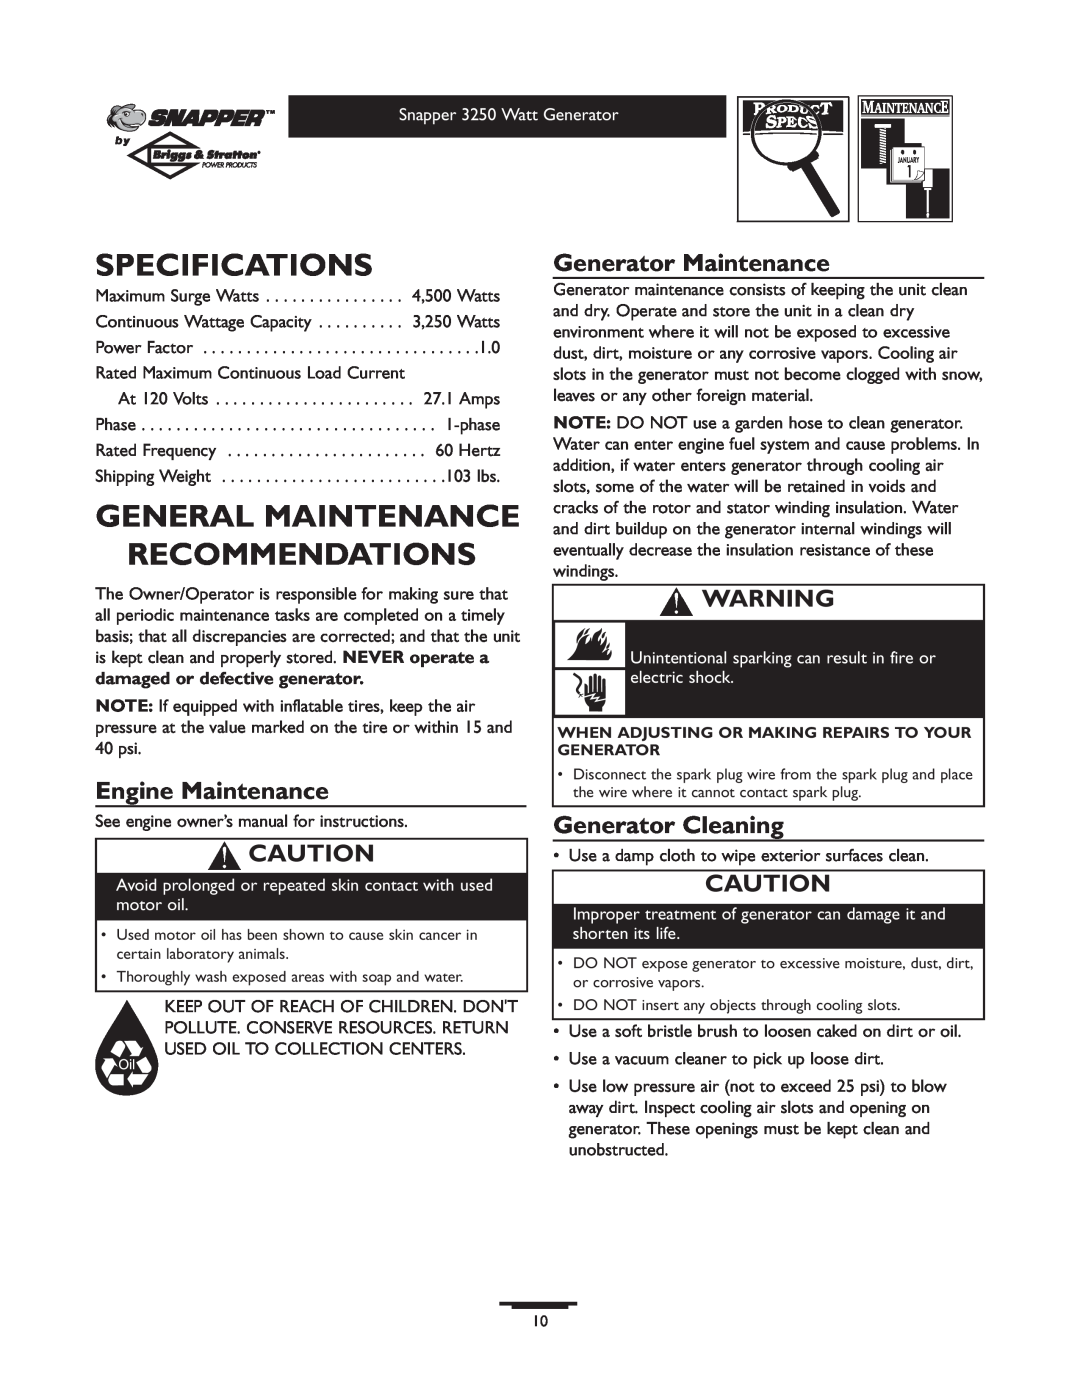 Snapper 1667-0 owner manual Specifications, General Maintenance Recommendations, Engine Maintenance, Generator Maintenance 